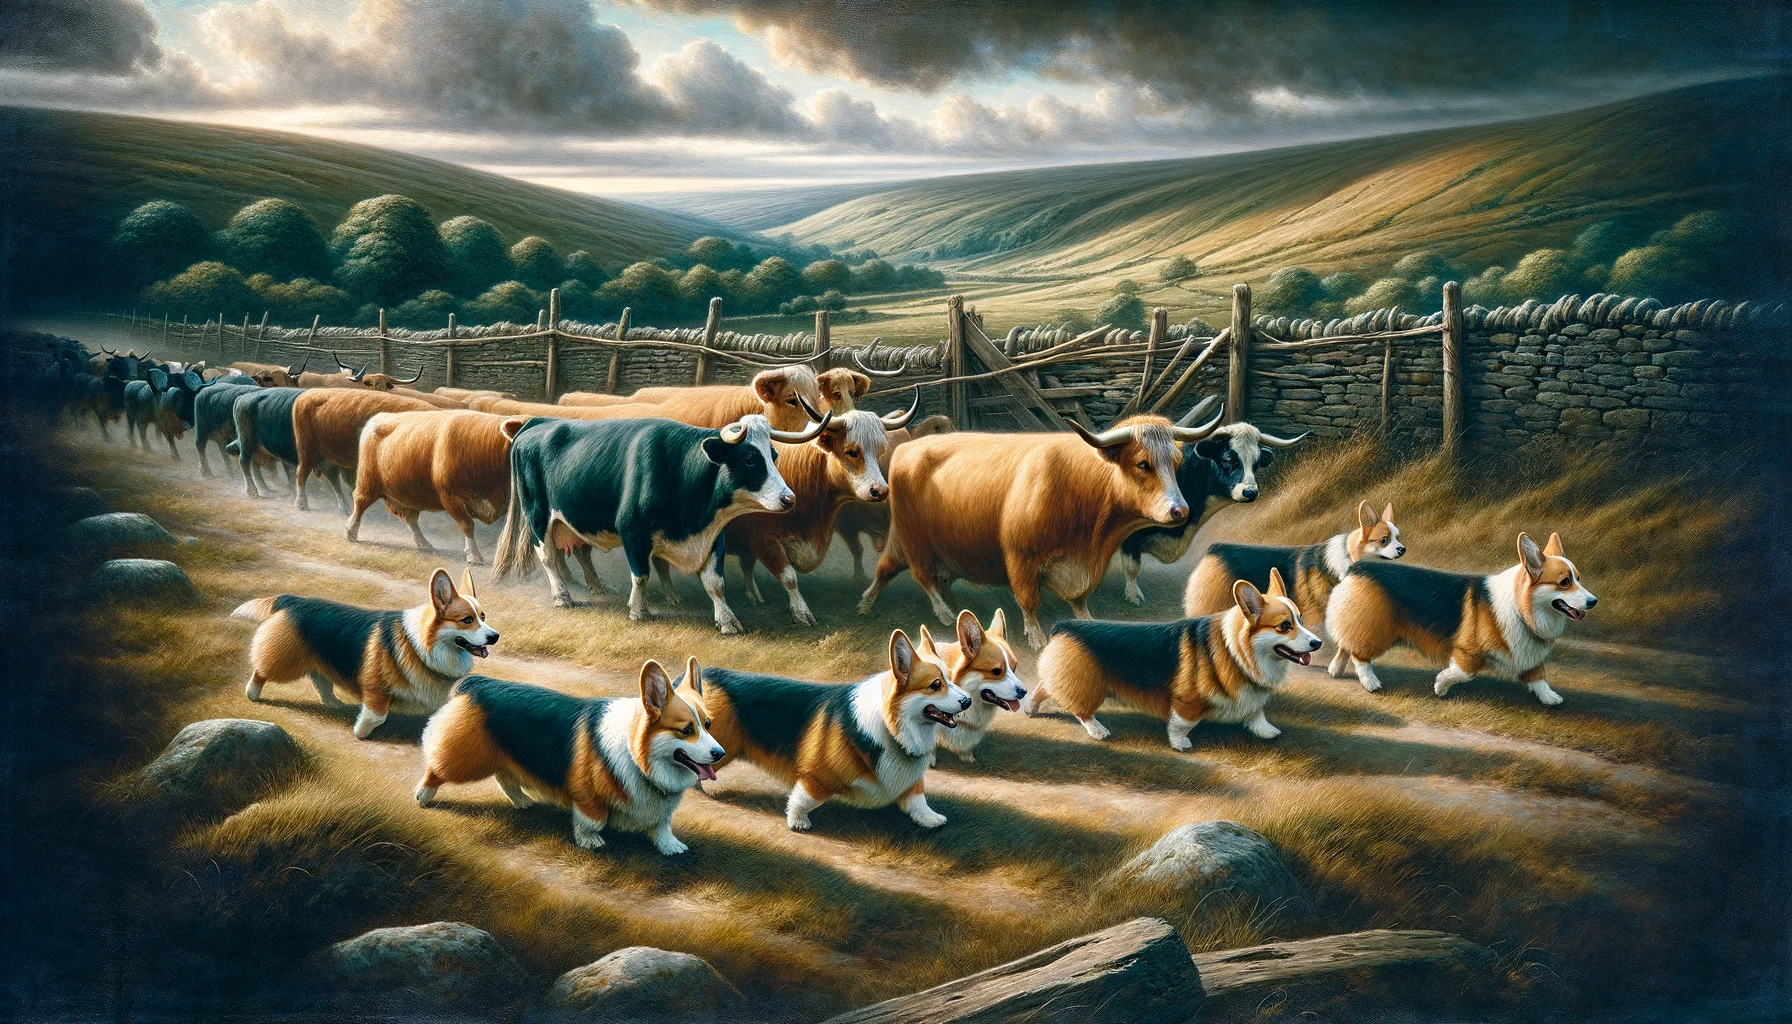 Historical painting of Corgis herding cattle in ancient Wales